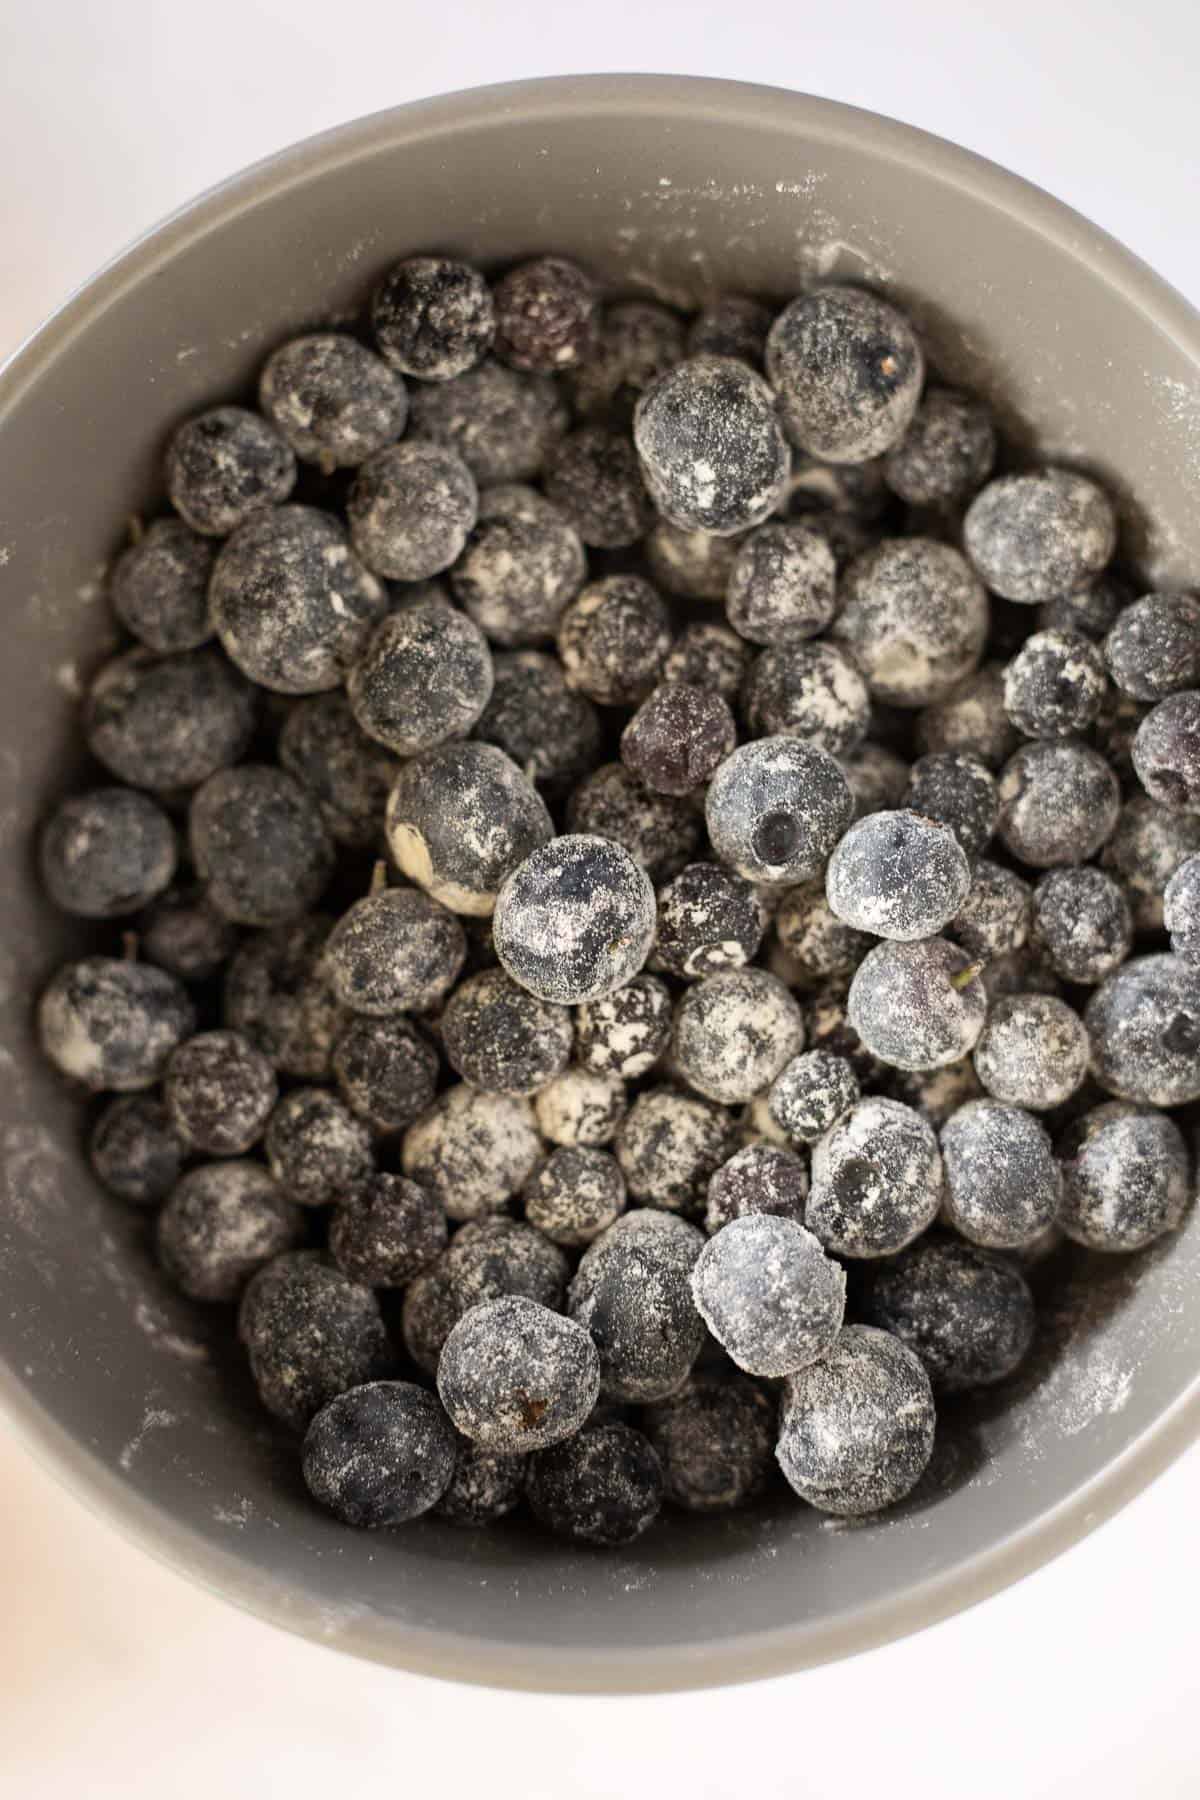 fresh blueberries coated in flour in a gray bowl.